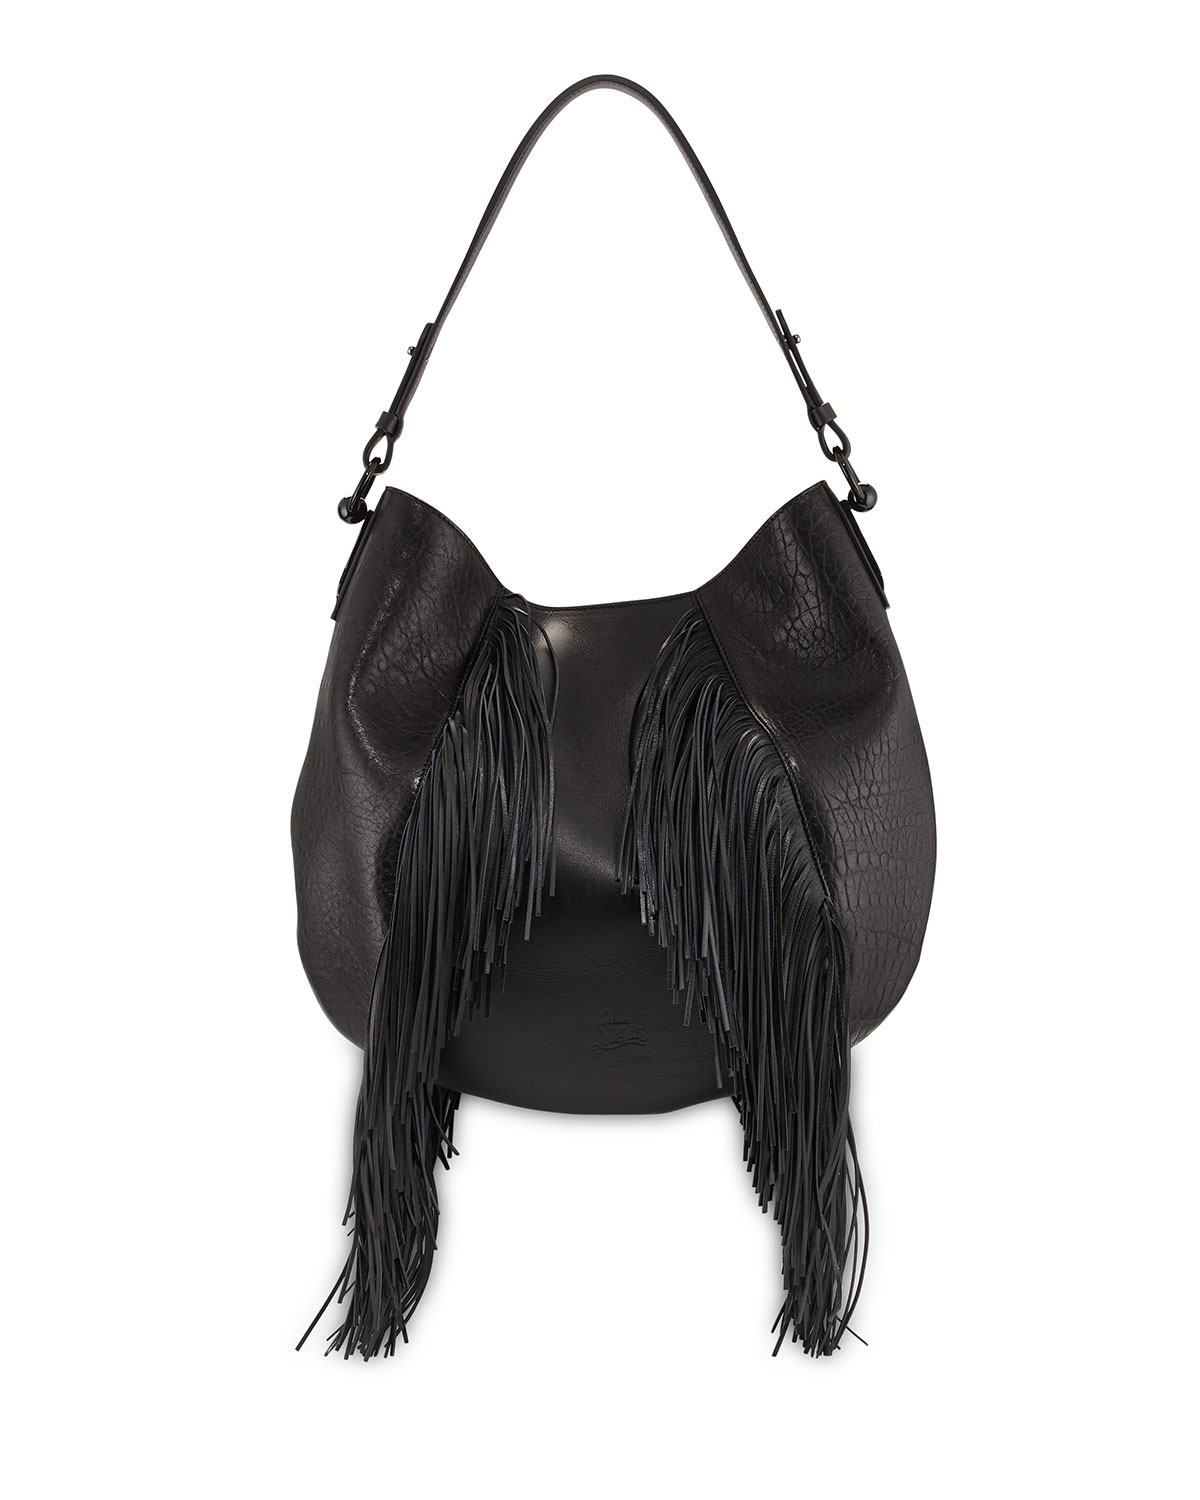 Lyst - Christian Louboutin Lucky Fringed Leather Hobo Bag in Black